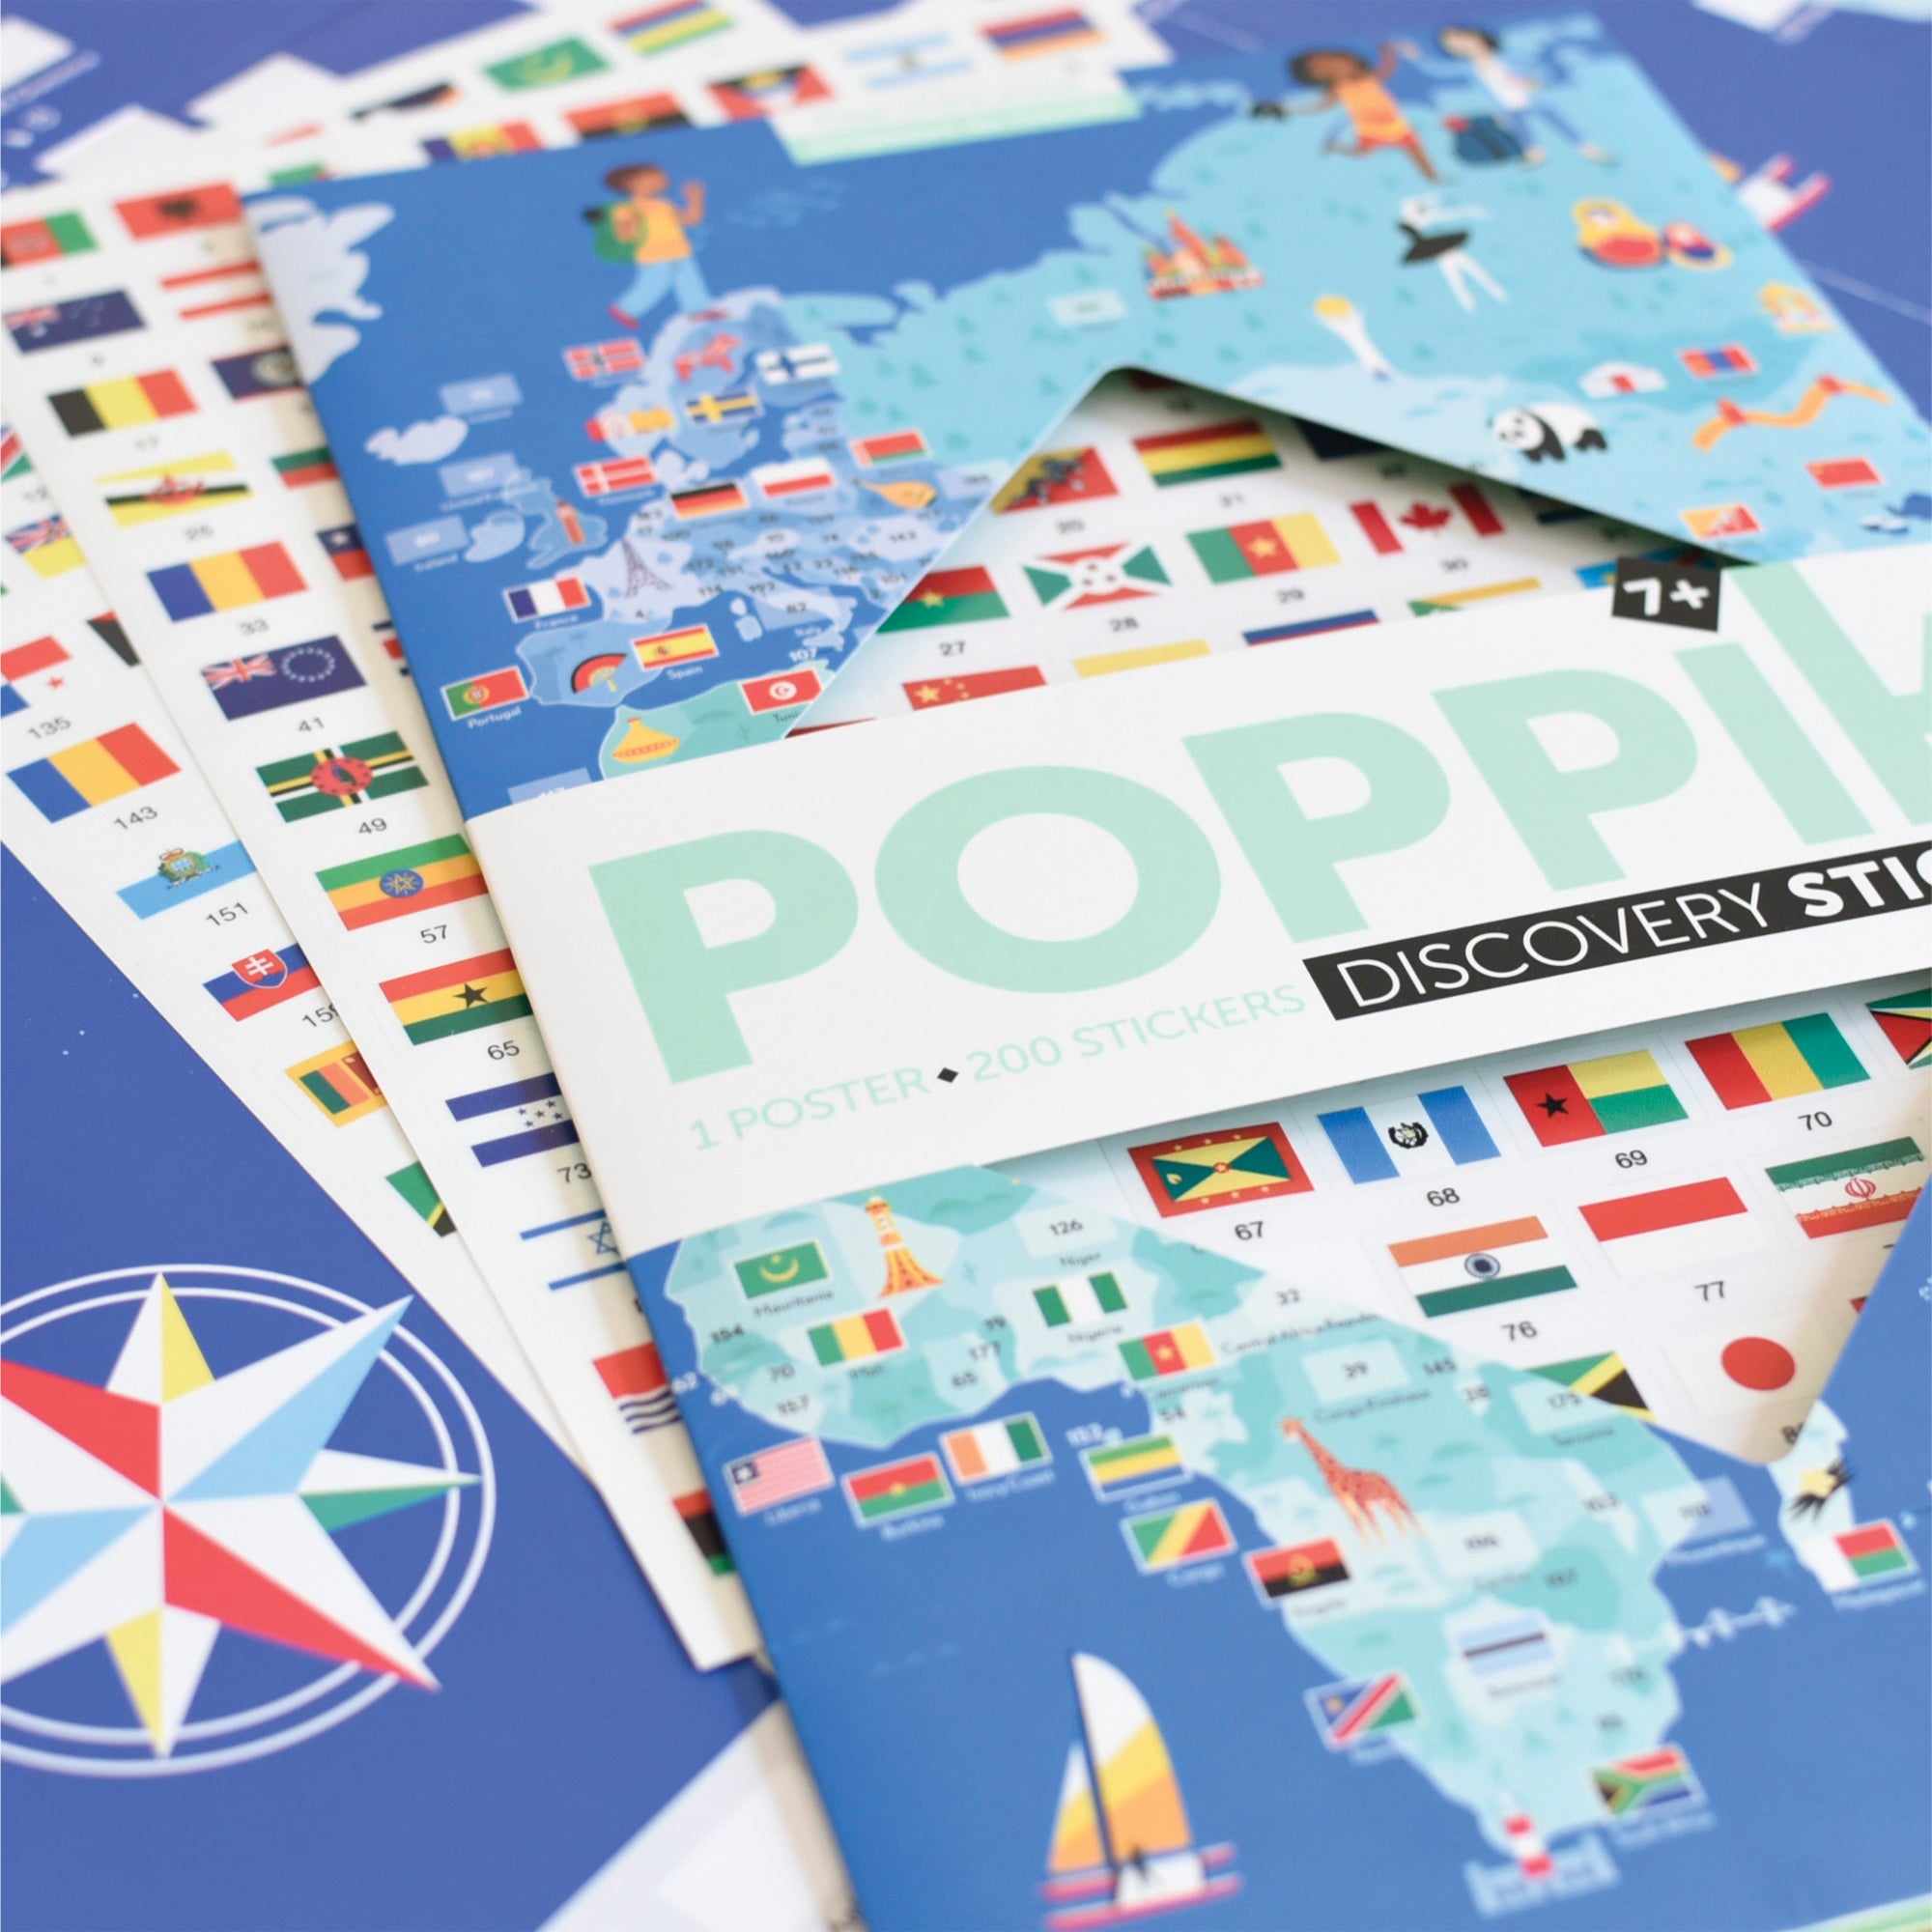 Poppik Flags of the World package cover. Cover map is mainly blue colors with colorful graphics of children and country-related items placed throughout. Poppik text is clear while the rest of the picture is slightly out of focus.